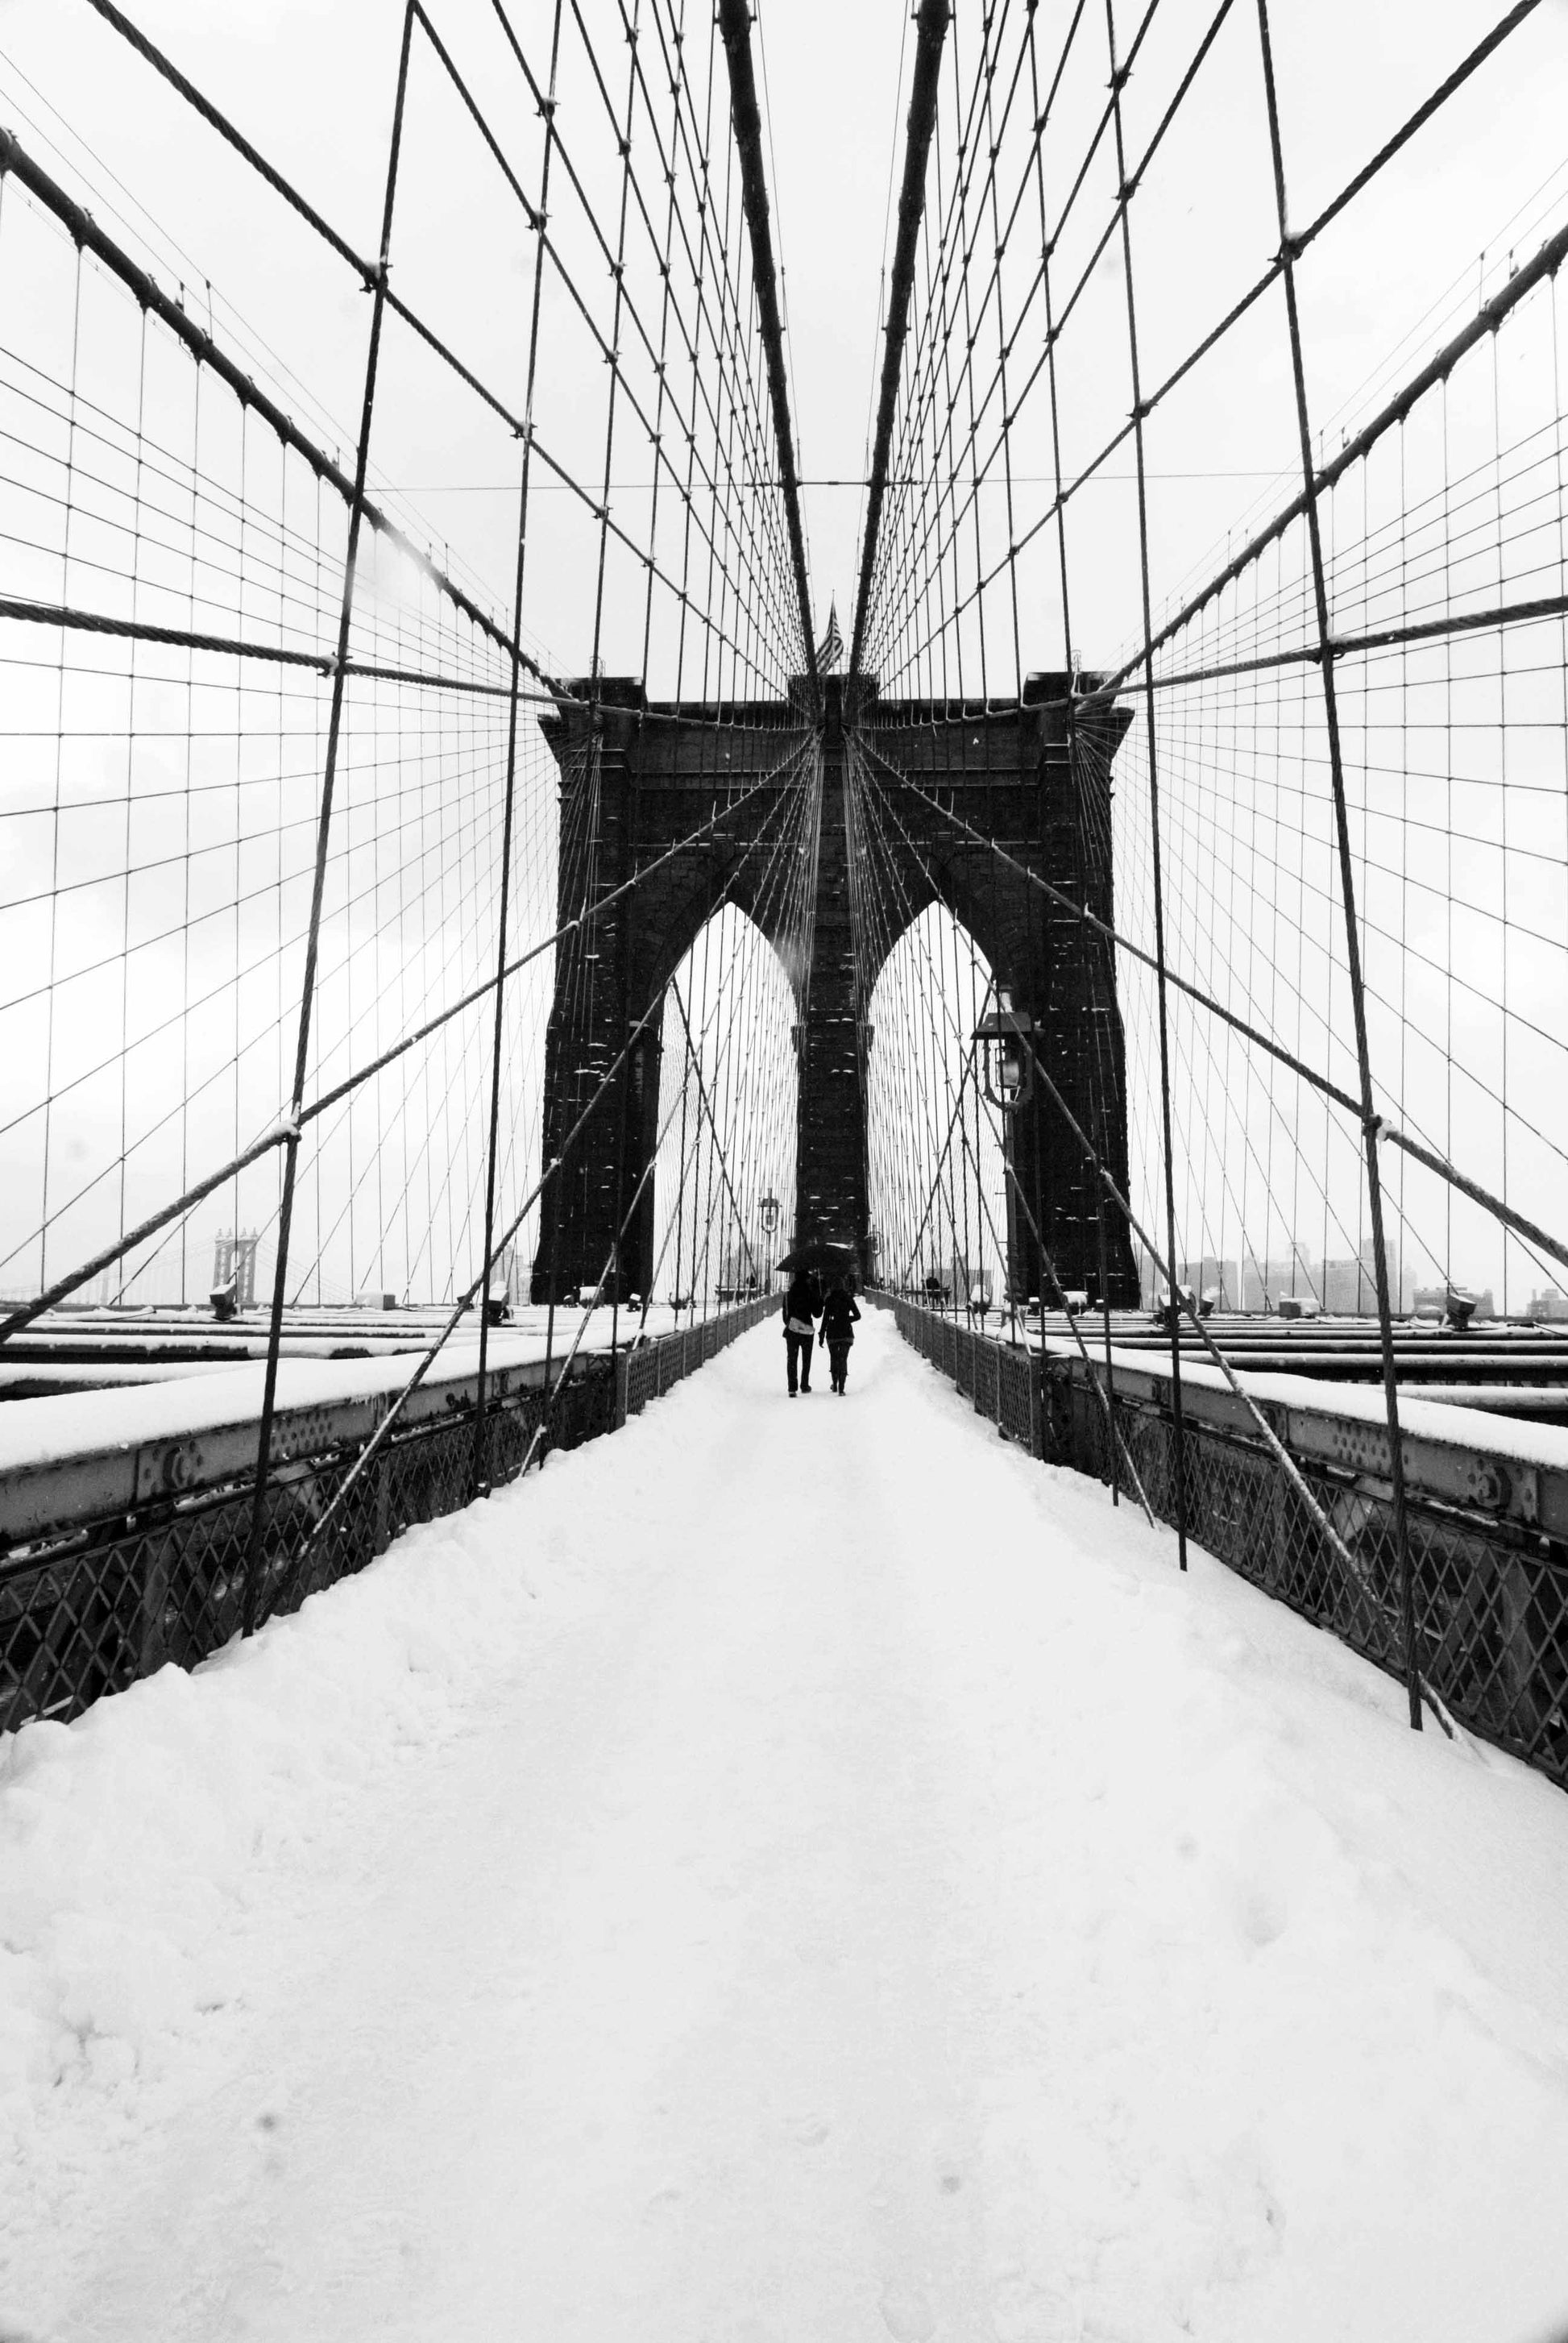 Alessandra Mattanza | INFINITY OF LOVE, New York. Lovers meet on a snowy Brooklyn Bridge. Available as an art print or photographic print on acrylic glass.